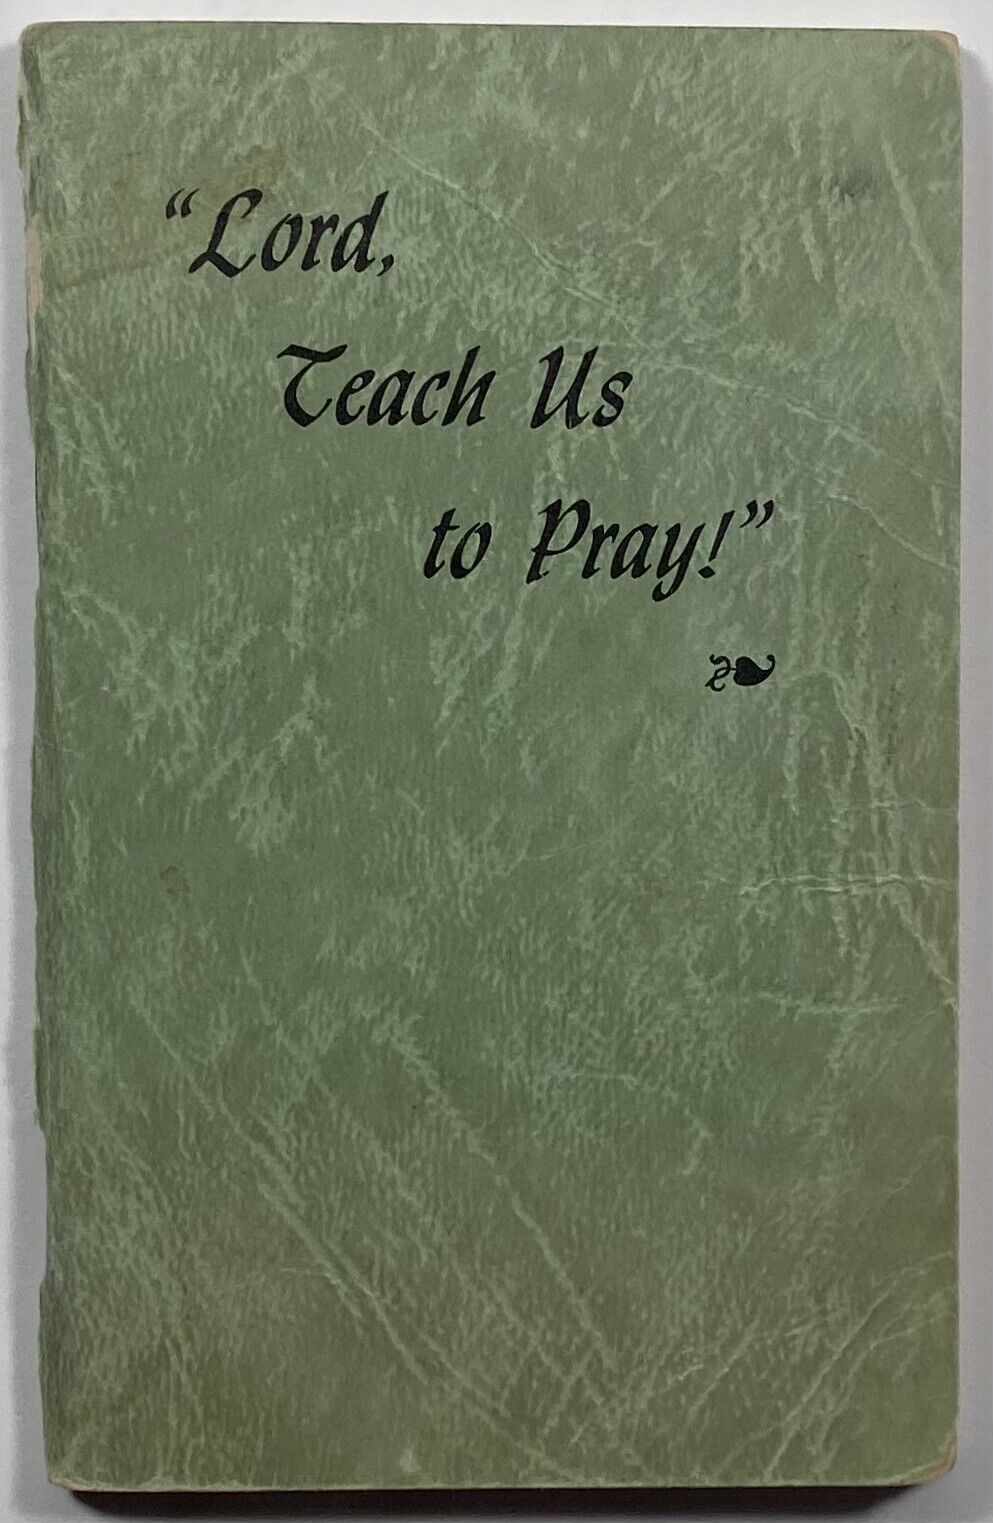 Lord Teach Us to Pray, Vintage Lutheran Holy Devotional Prayer Booklet.